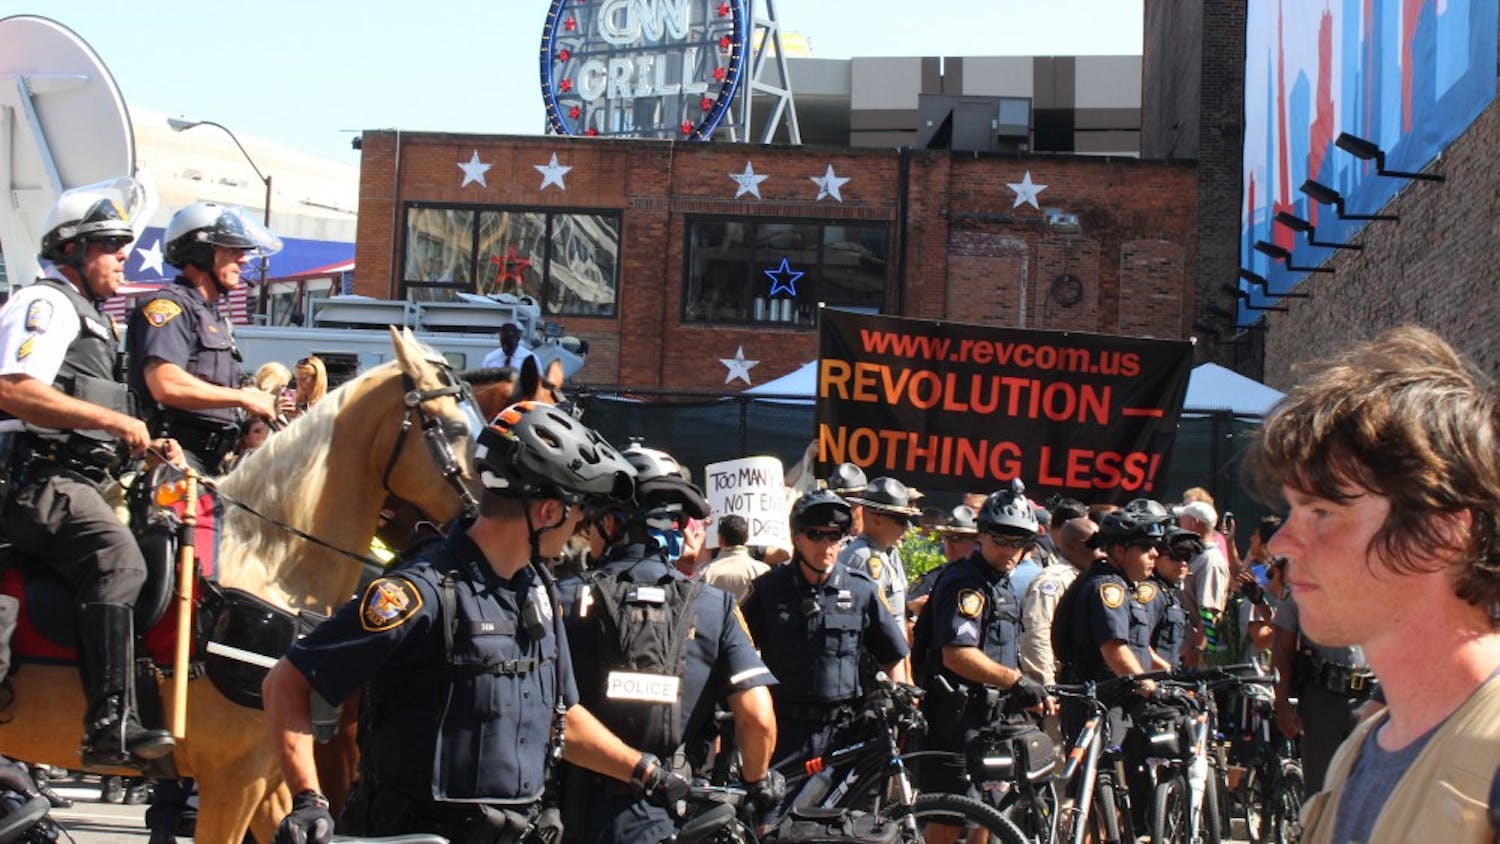 Police officers on horses order crowds to disperse after an American flag burning demonstration sparked controversy on Fourth and Prospect during the third day of the Republican National Convention.